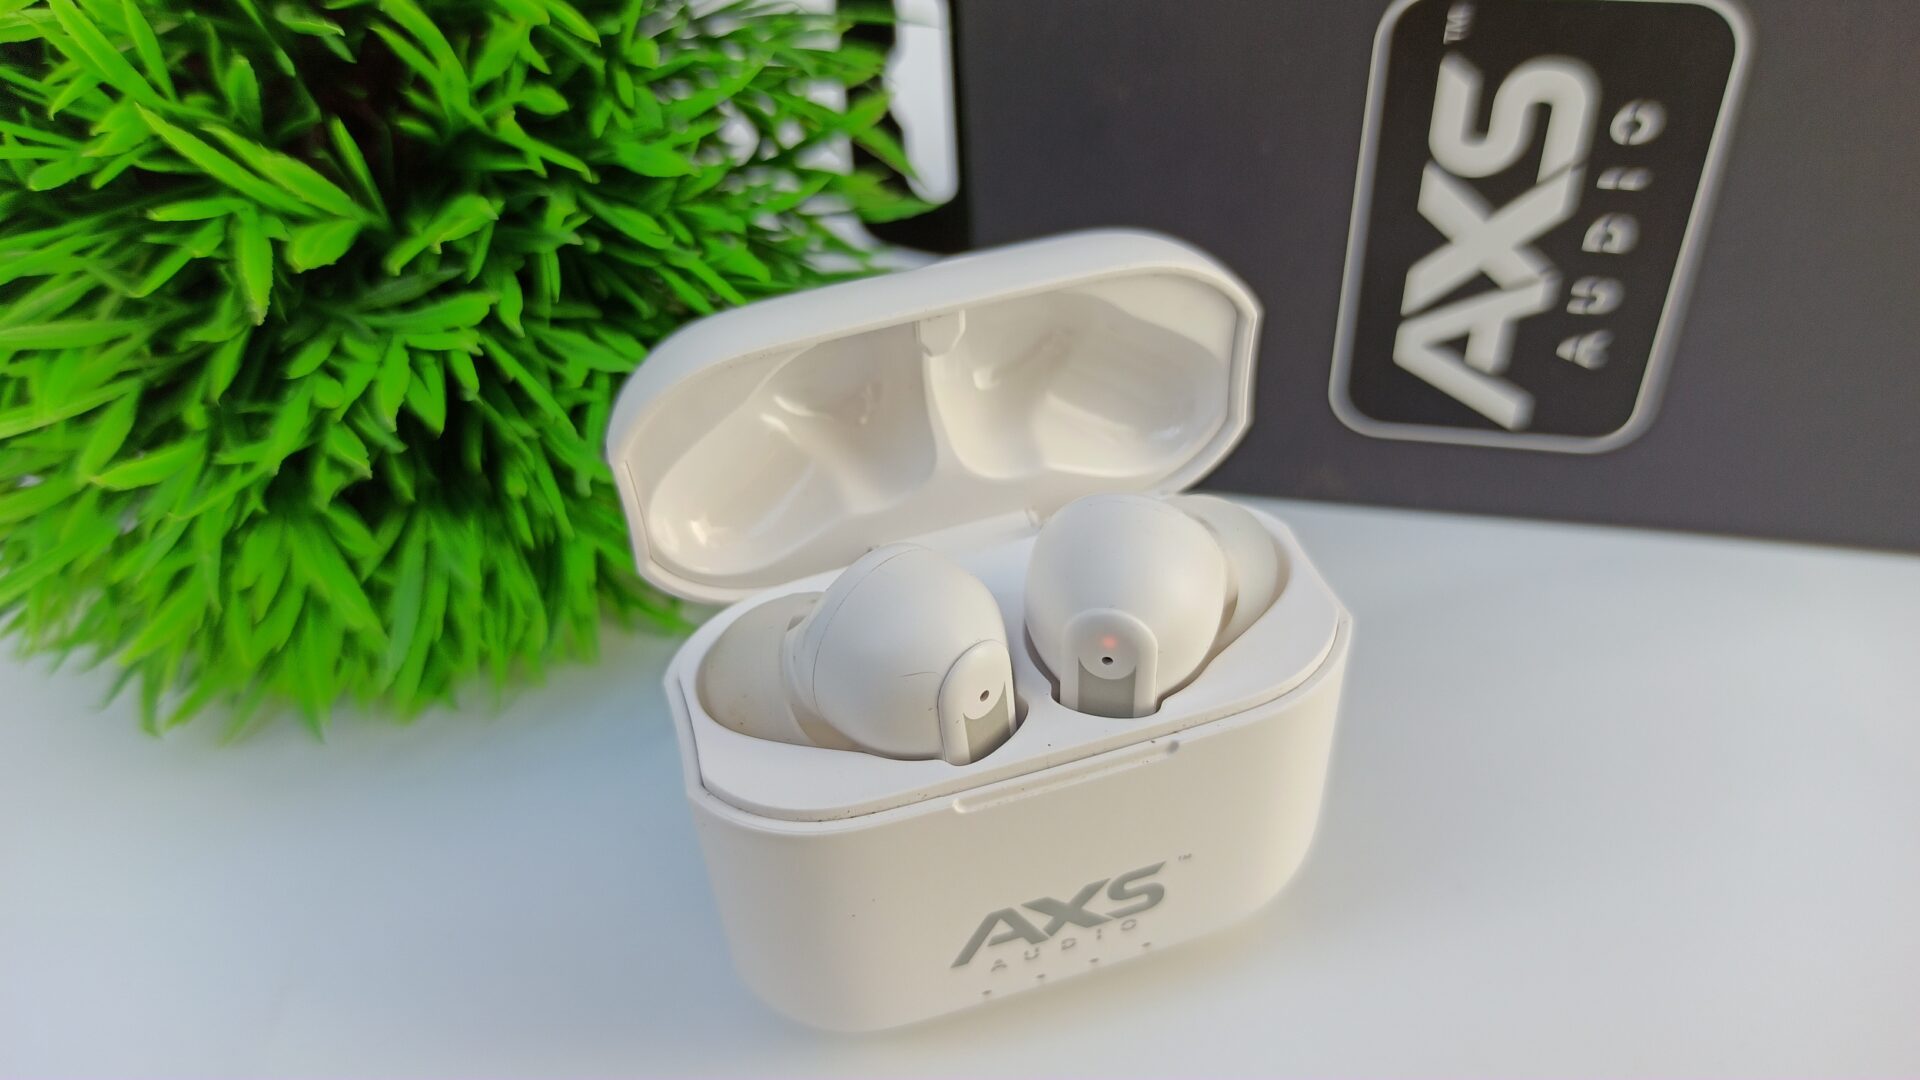 How to pair The AXS Audio Earbuds with your smartphone